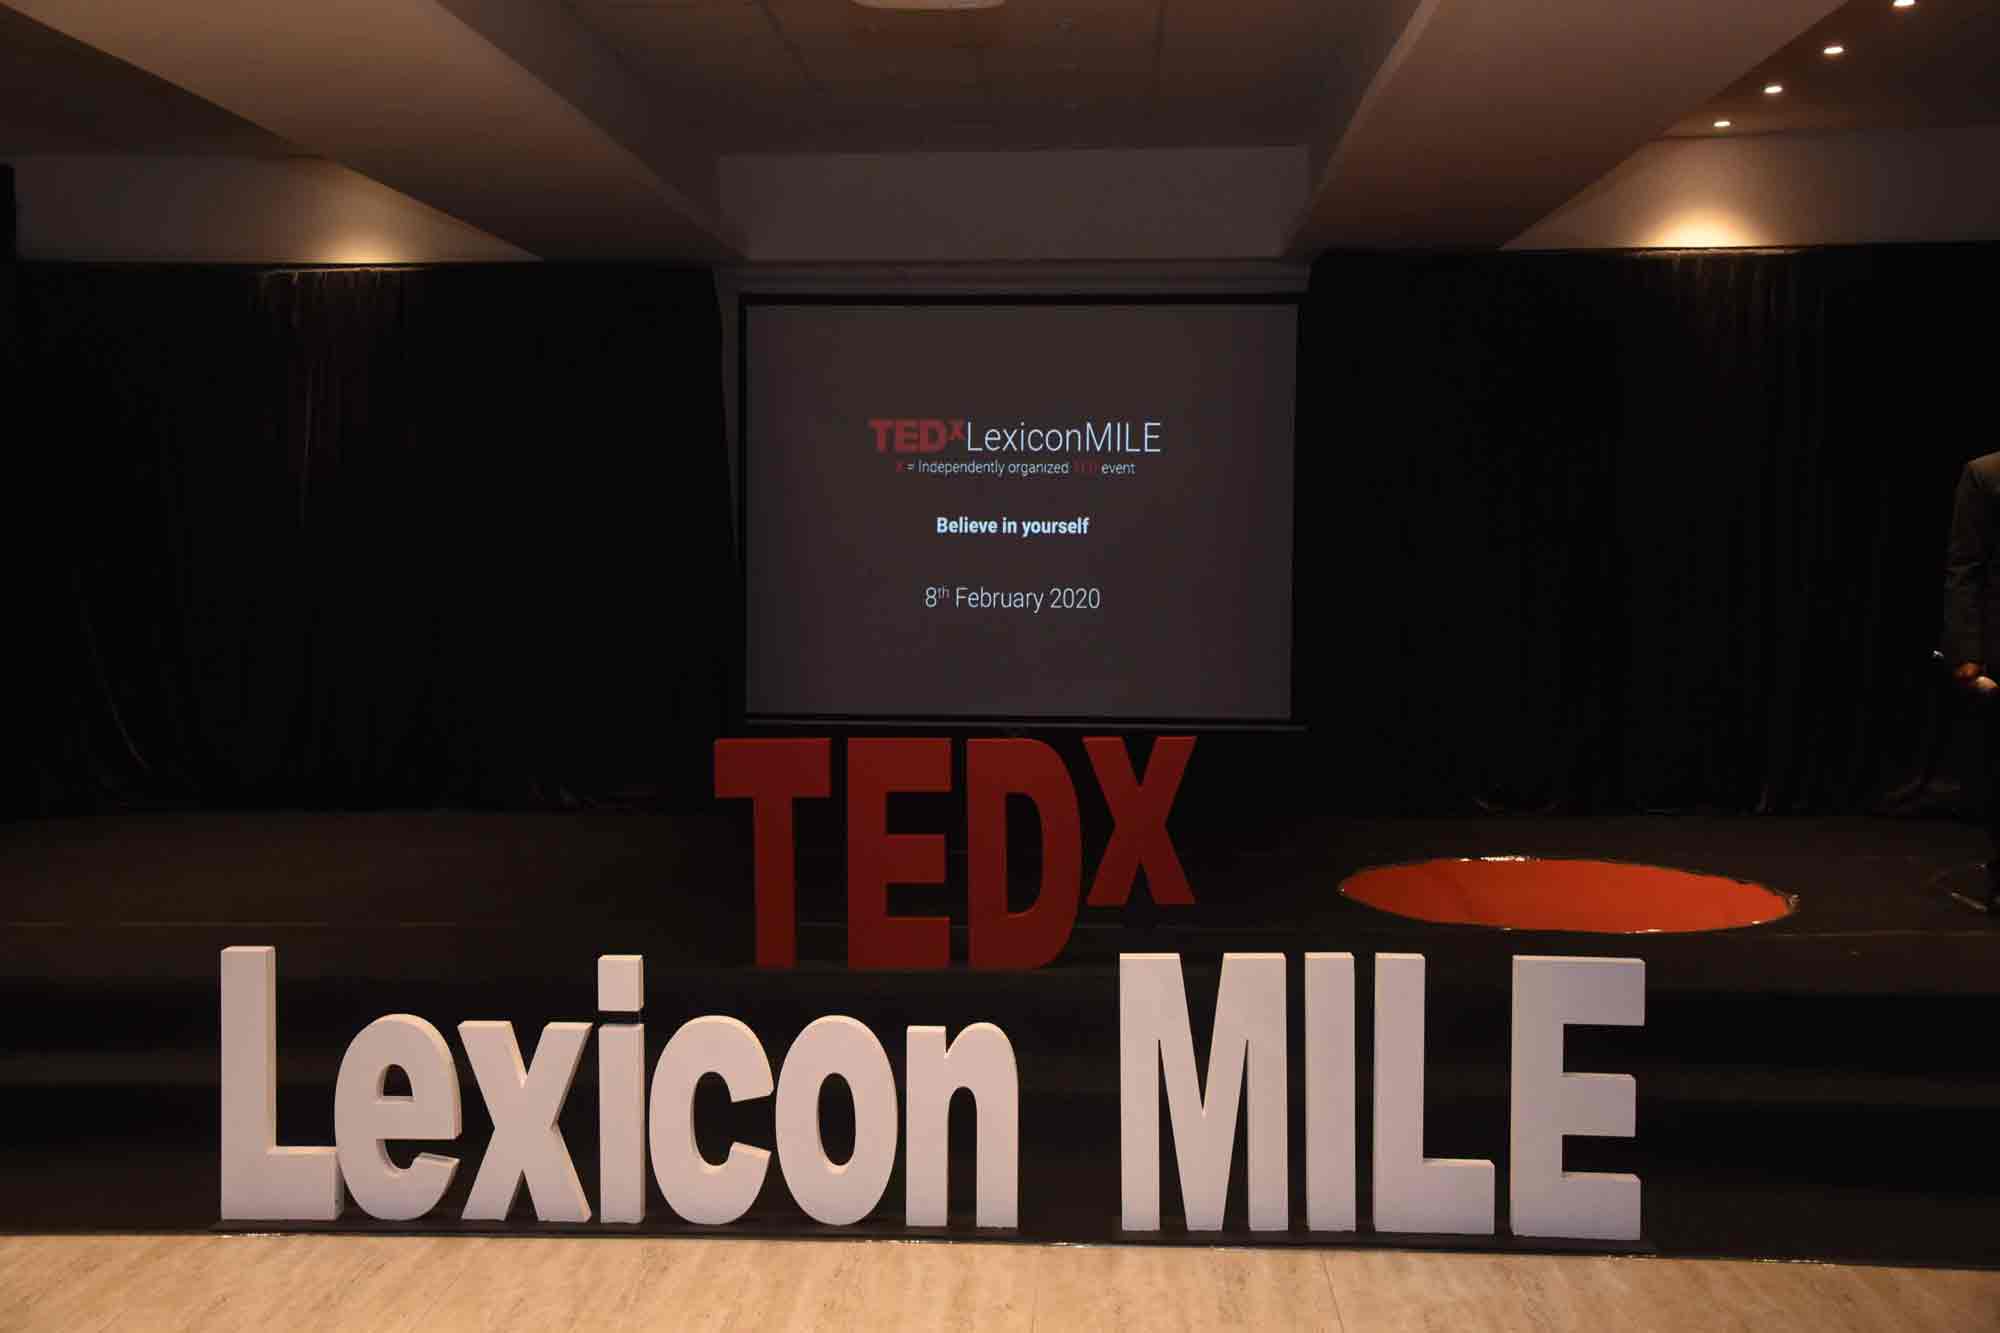 Tedx Events